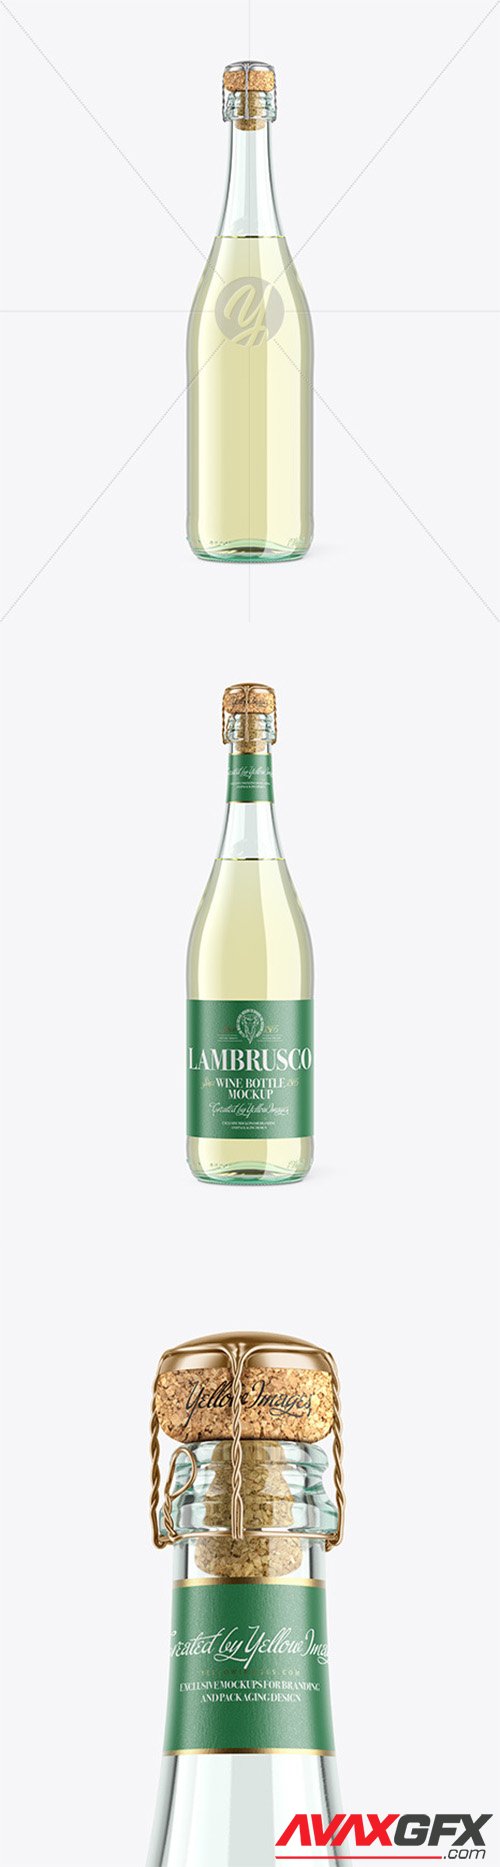 Clear Glass Lambrusco Bottle With White Wine Mockup 62602